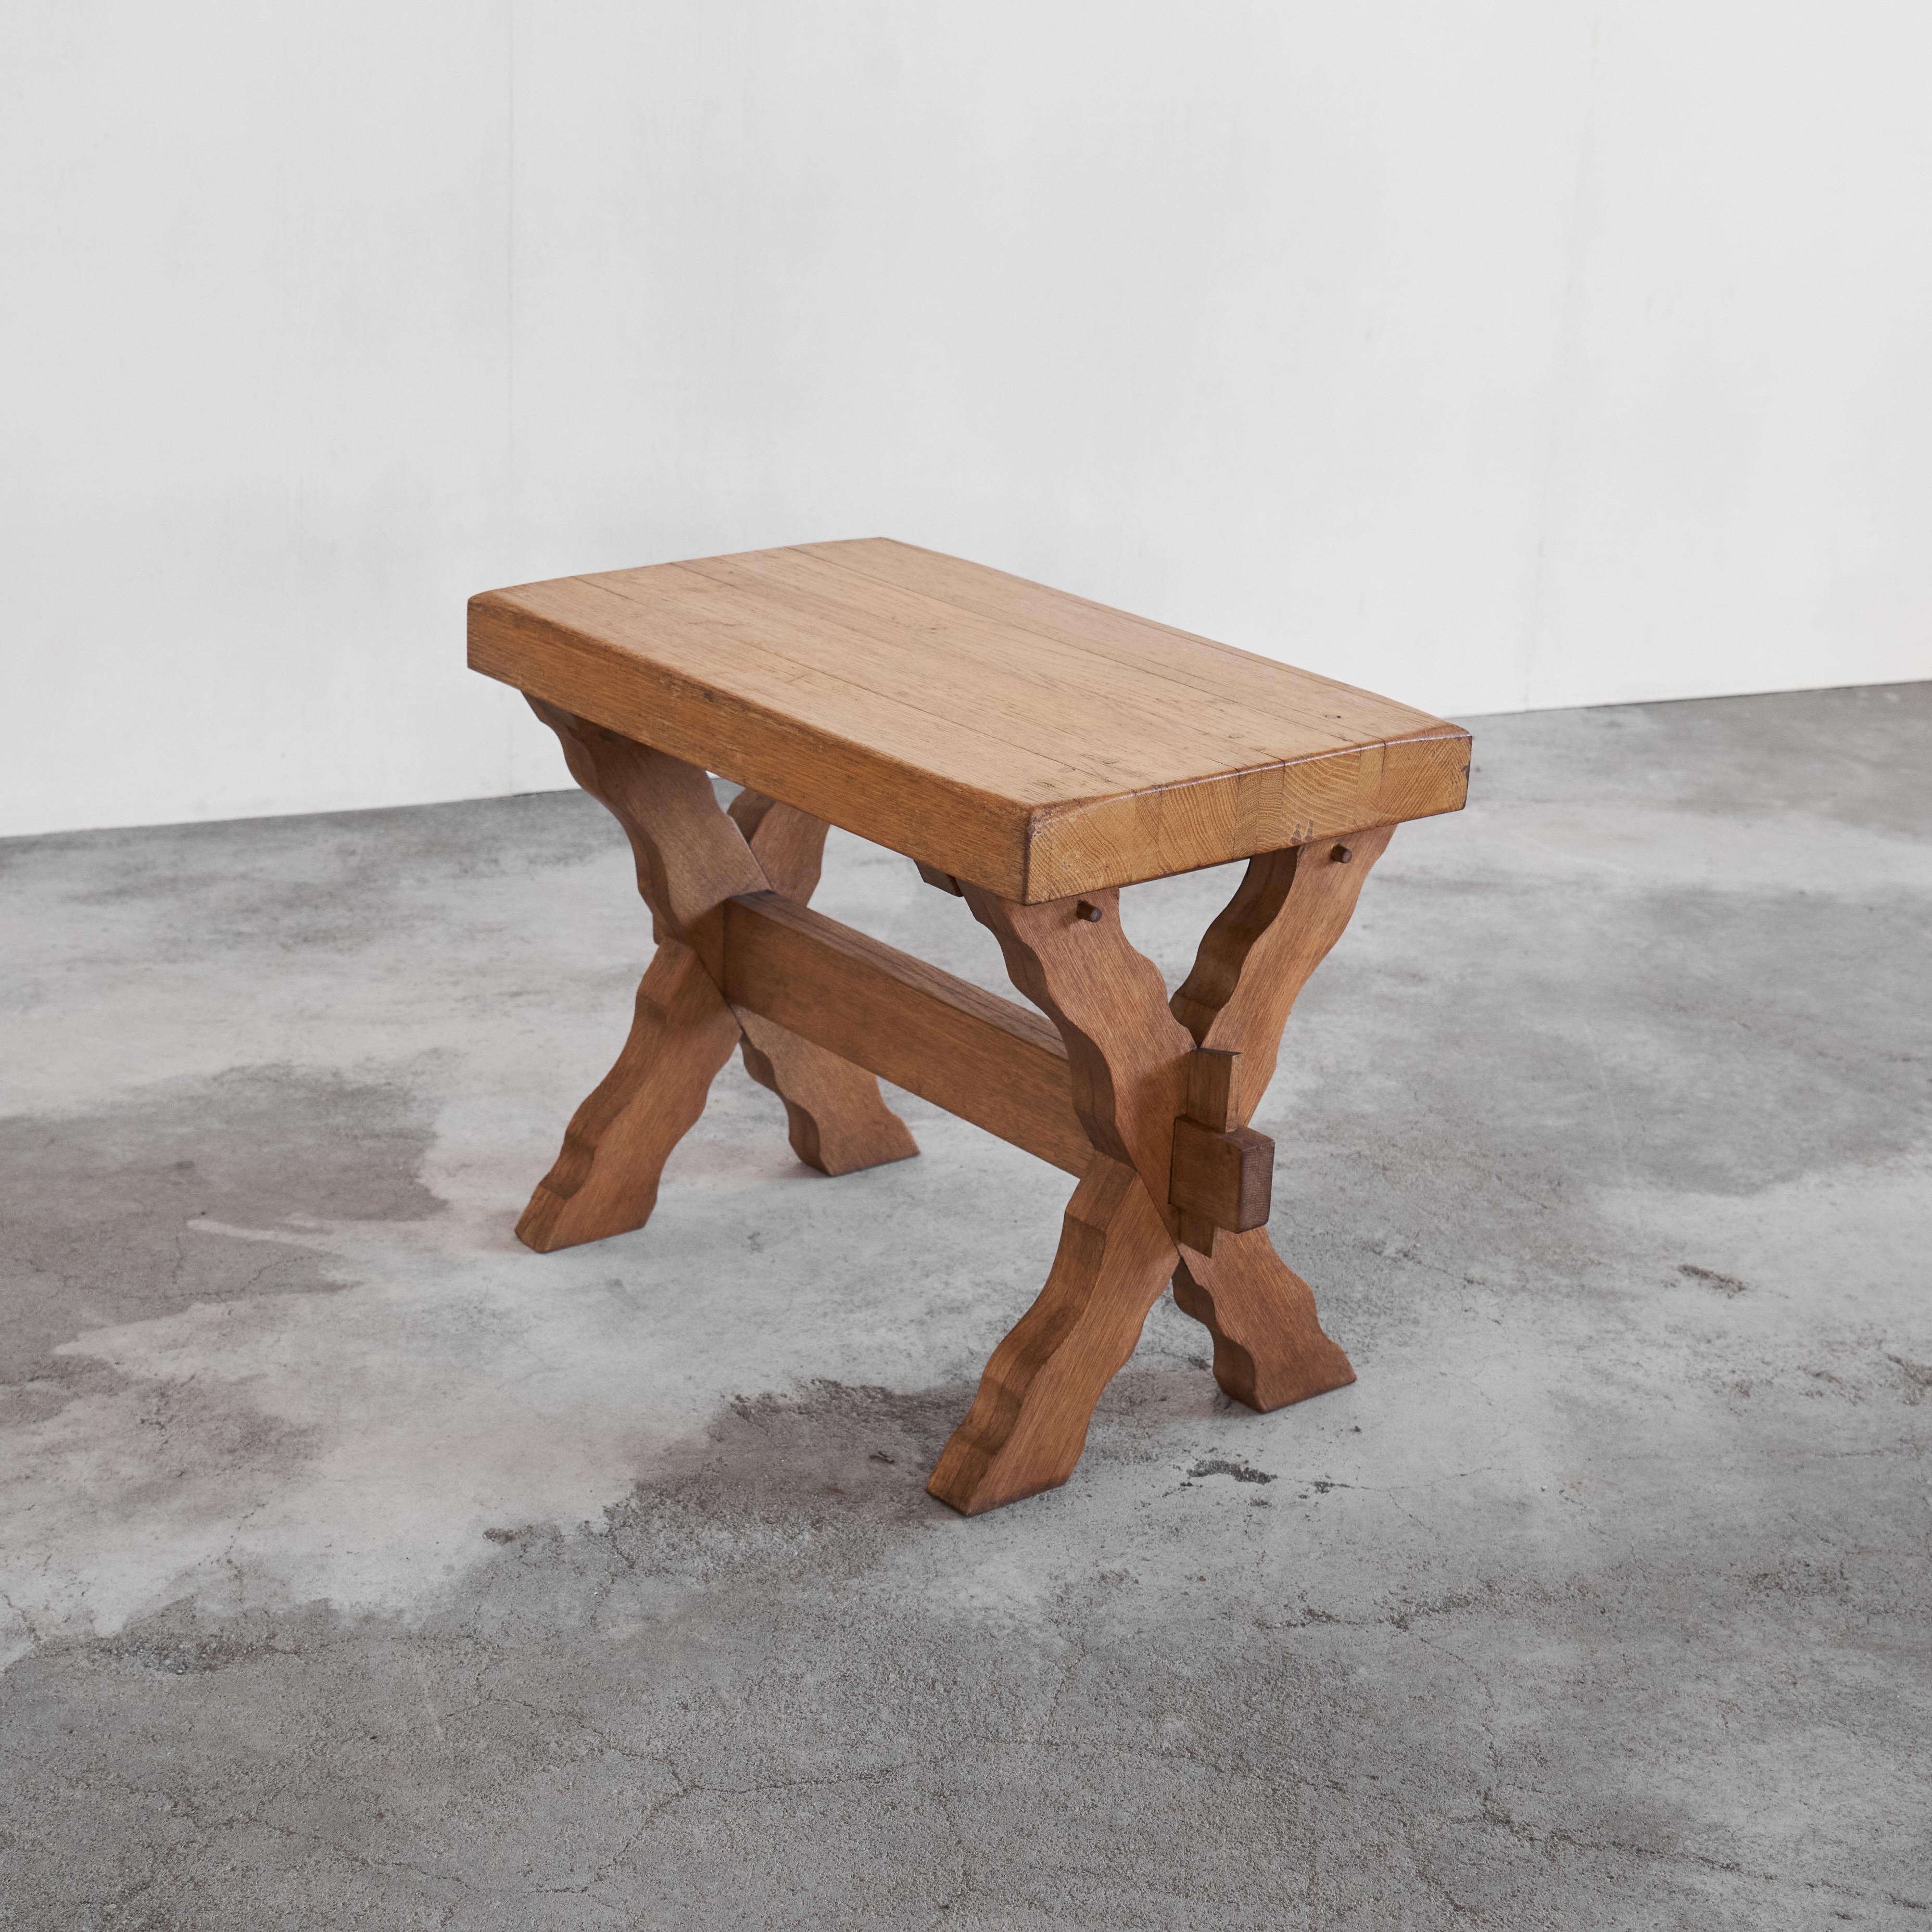 Sculptural Cross Legged Side Table in Solid Wood 1940s.

Great sculptural cross legged table / side table in thick solid wood, made in the middle of the 20th century. Rough and rustic in appearance, this table is a very honest and pure piece of